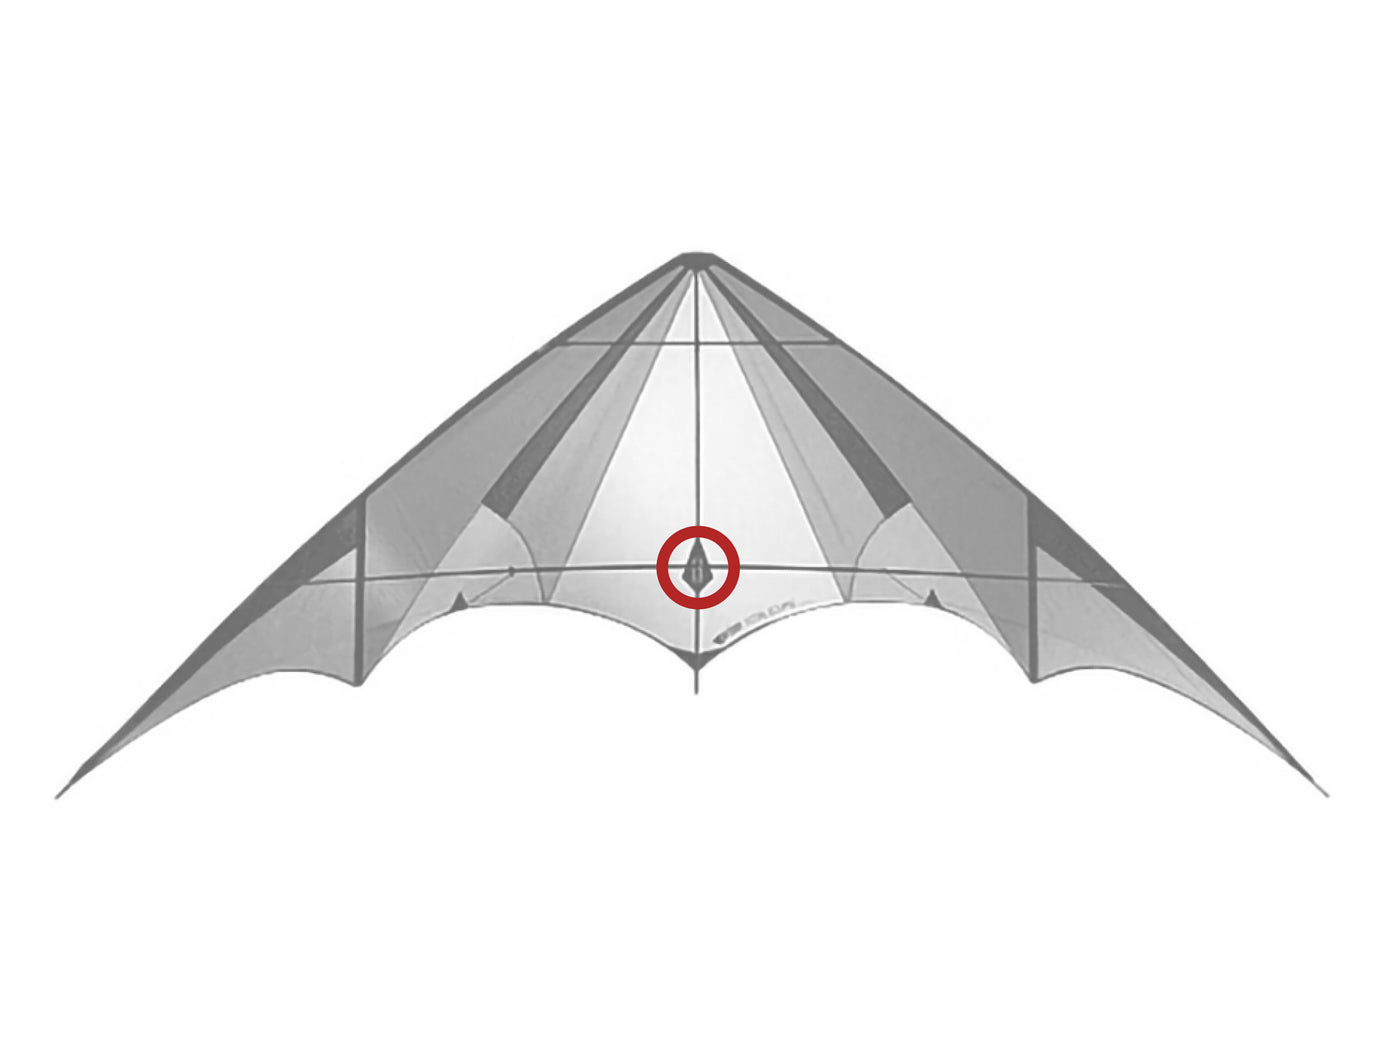 Diagram showing location of the Total Eclipse Center T on the kite.